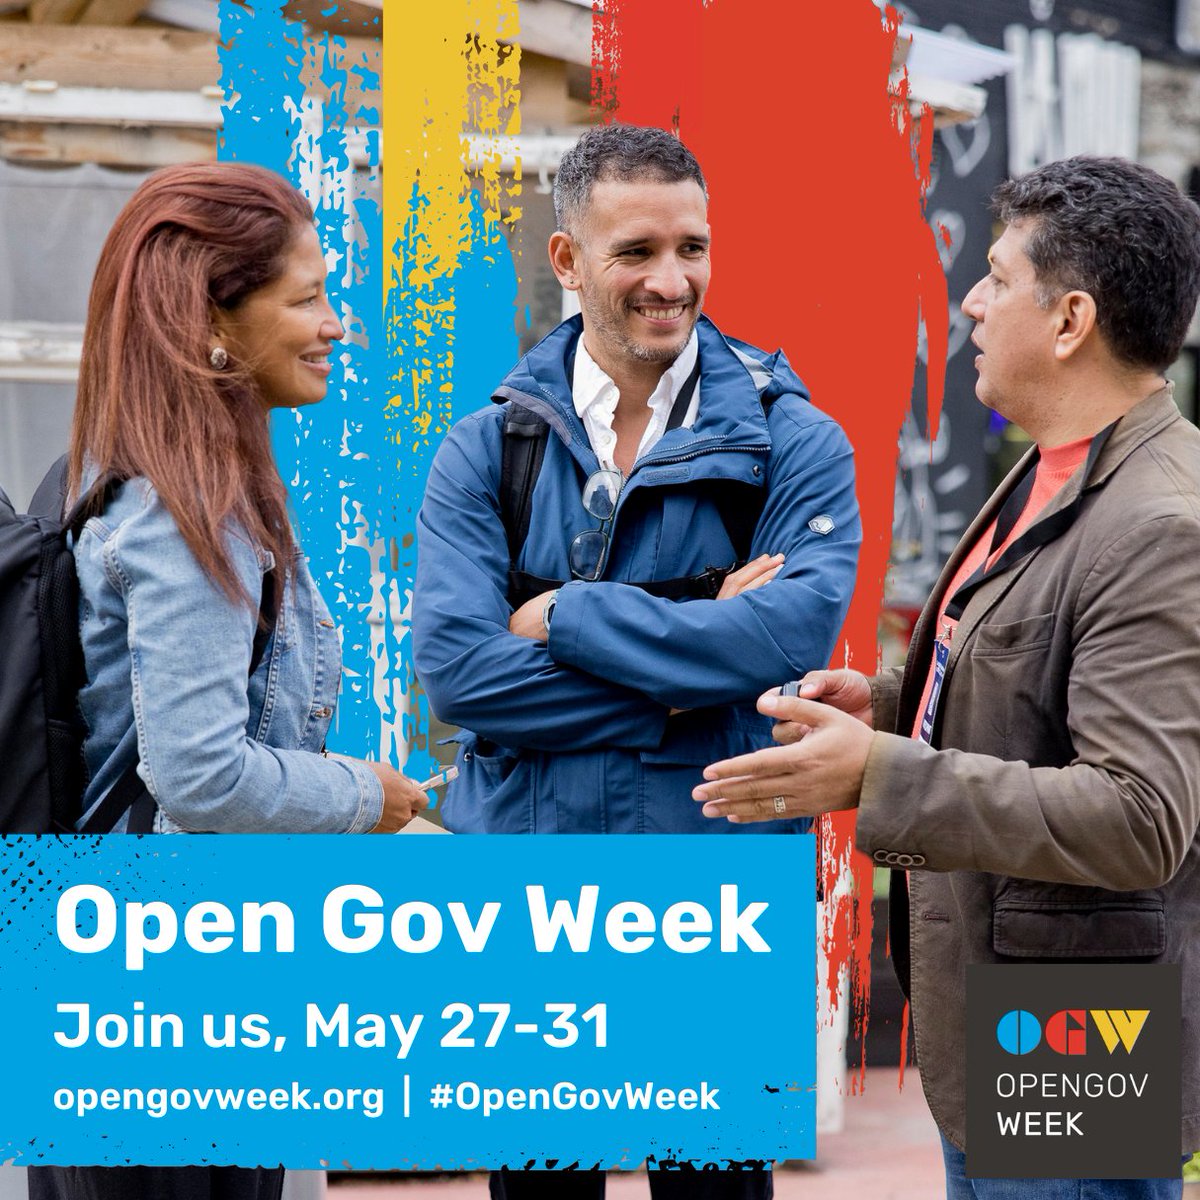 #OpenGovWeek is just around the corner! Join us in raising open gov ambition from May 27-31, 2024. Want to promote your event? Visit opengovweek.org for: 🛠️ Toolkits in English, Spanish & French 🎨 Customizable Graphics 🤳 Pre-made graphics for social media and more!